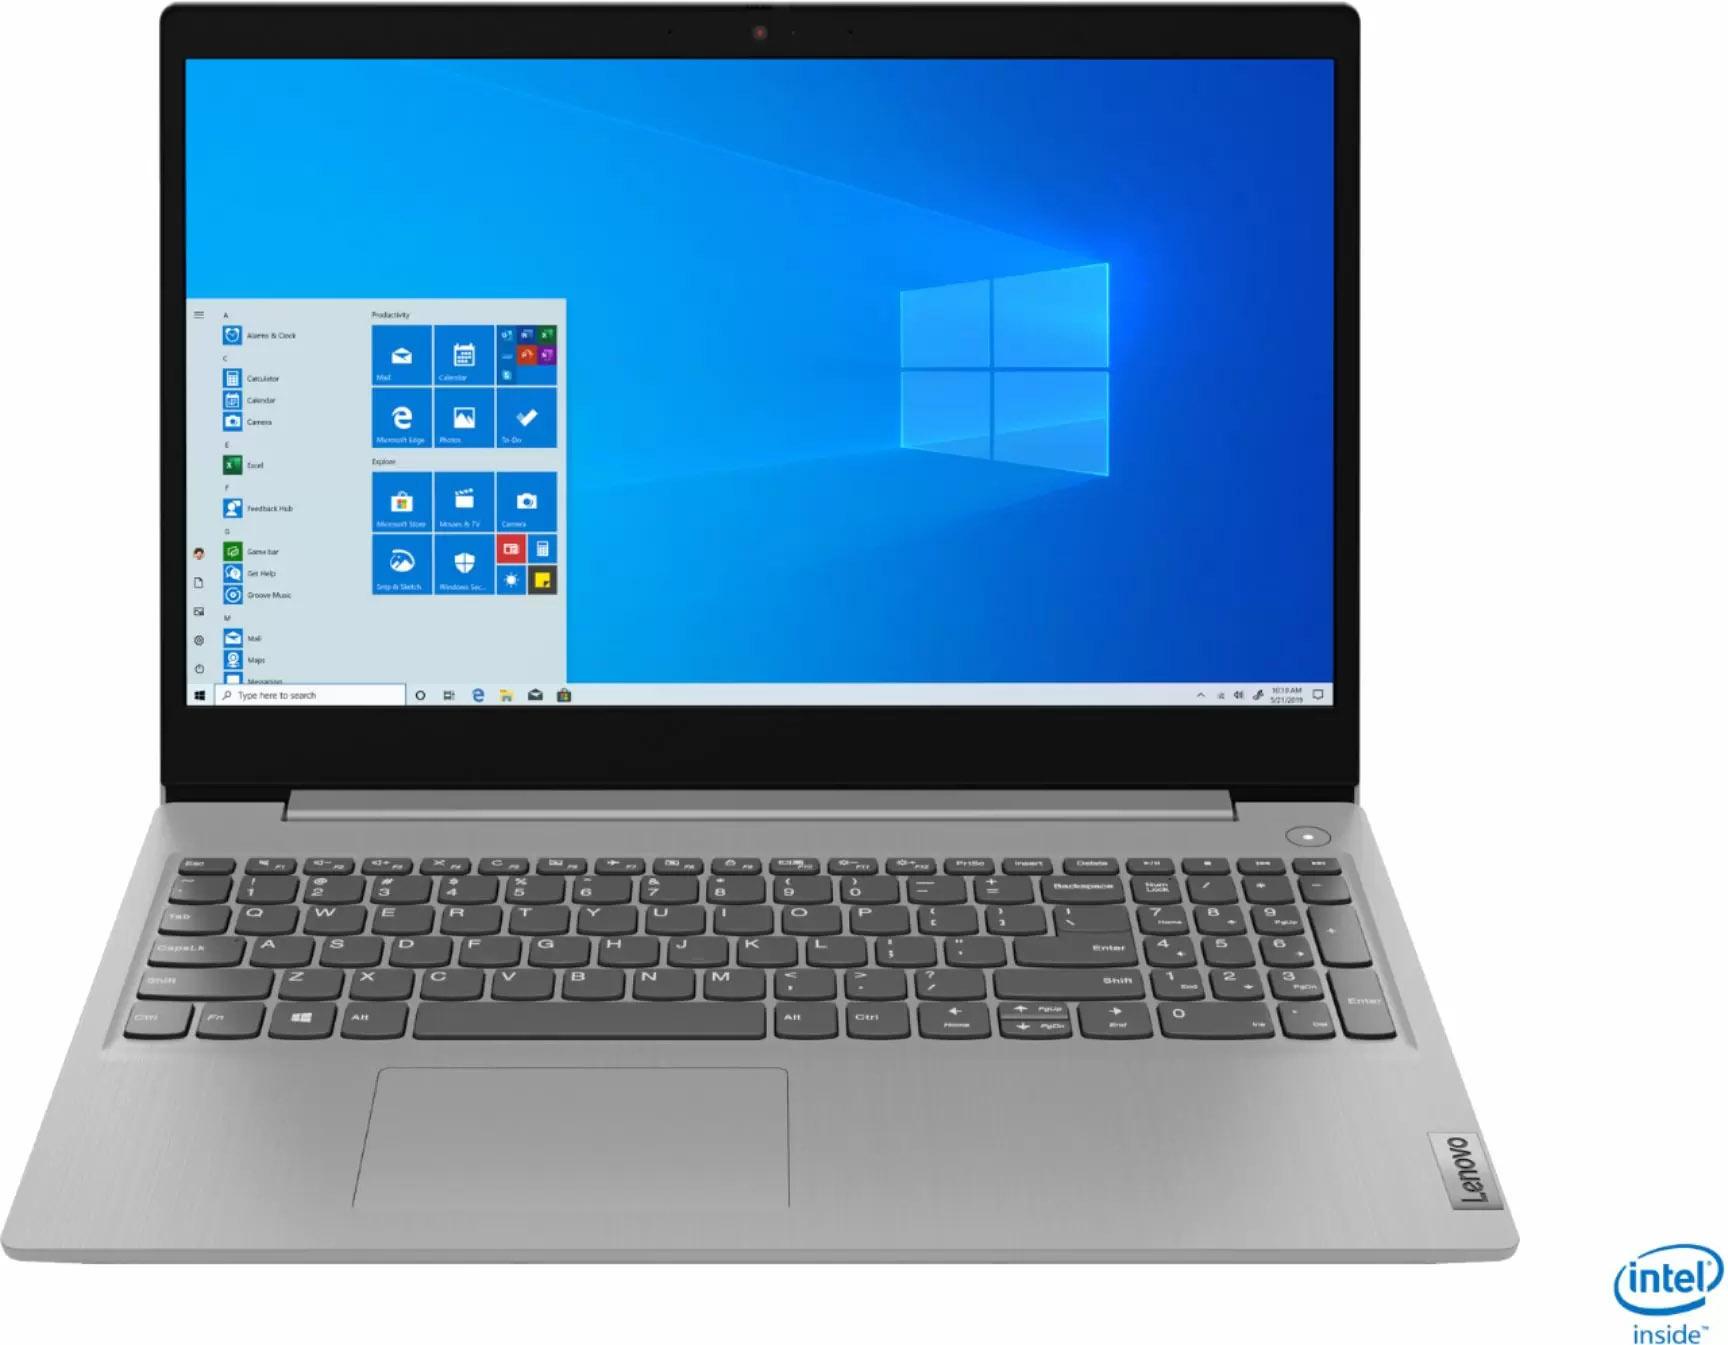 Lenovo IdeaPad 3 15in i3 8GB 256GB Notebook Laptop for $299.99 Shipped